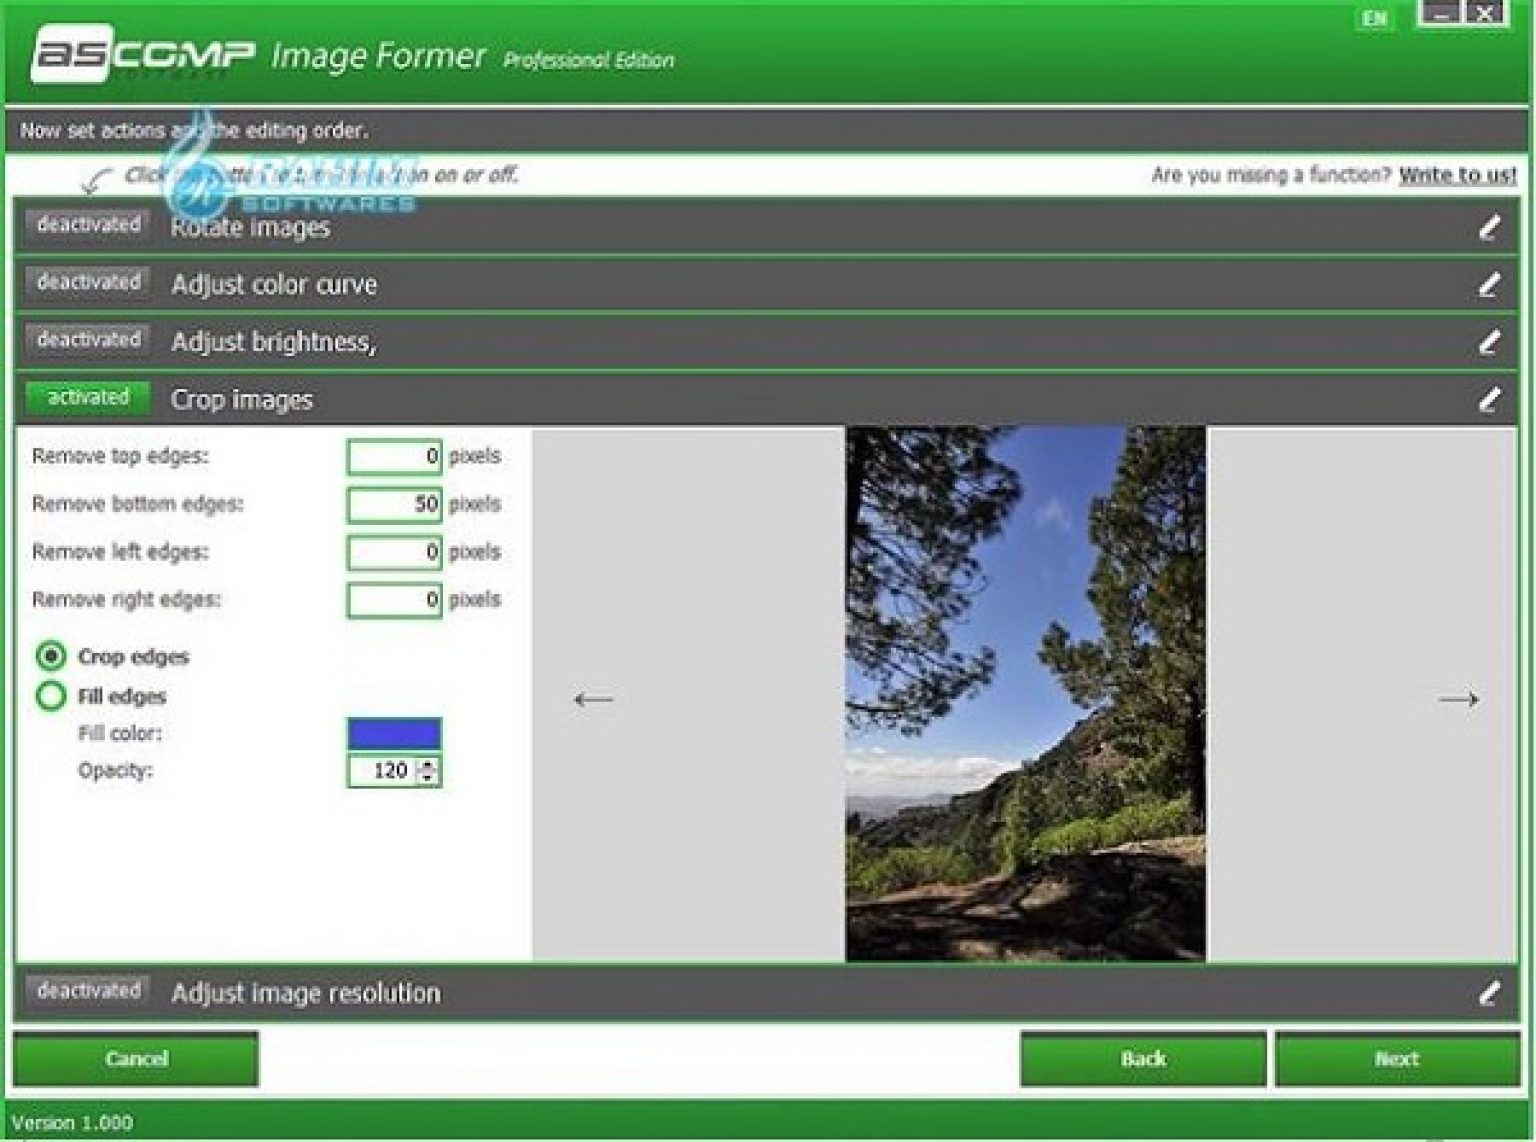 instal the new version for android ASCOMP Image Former Professional 2.004